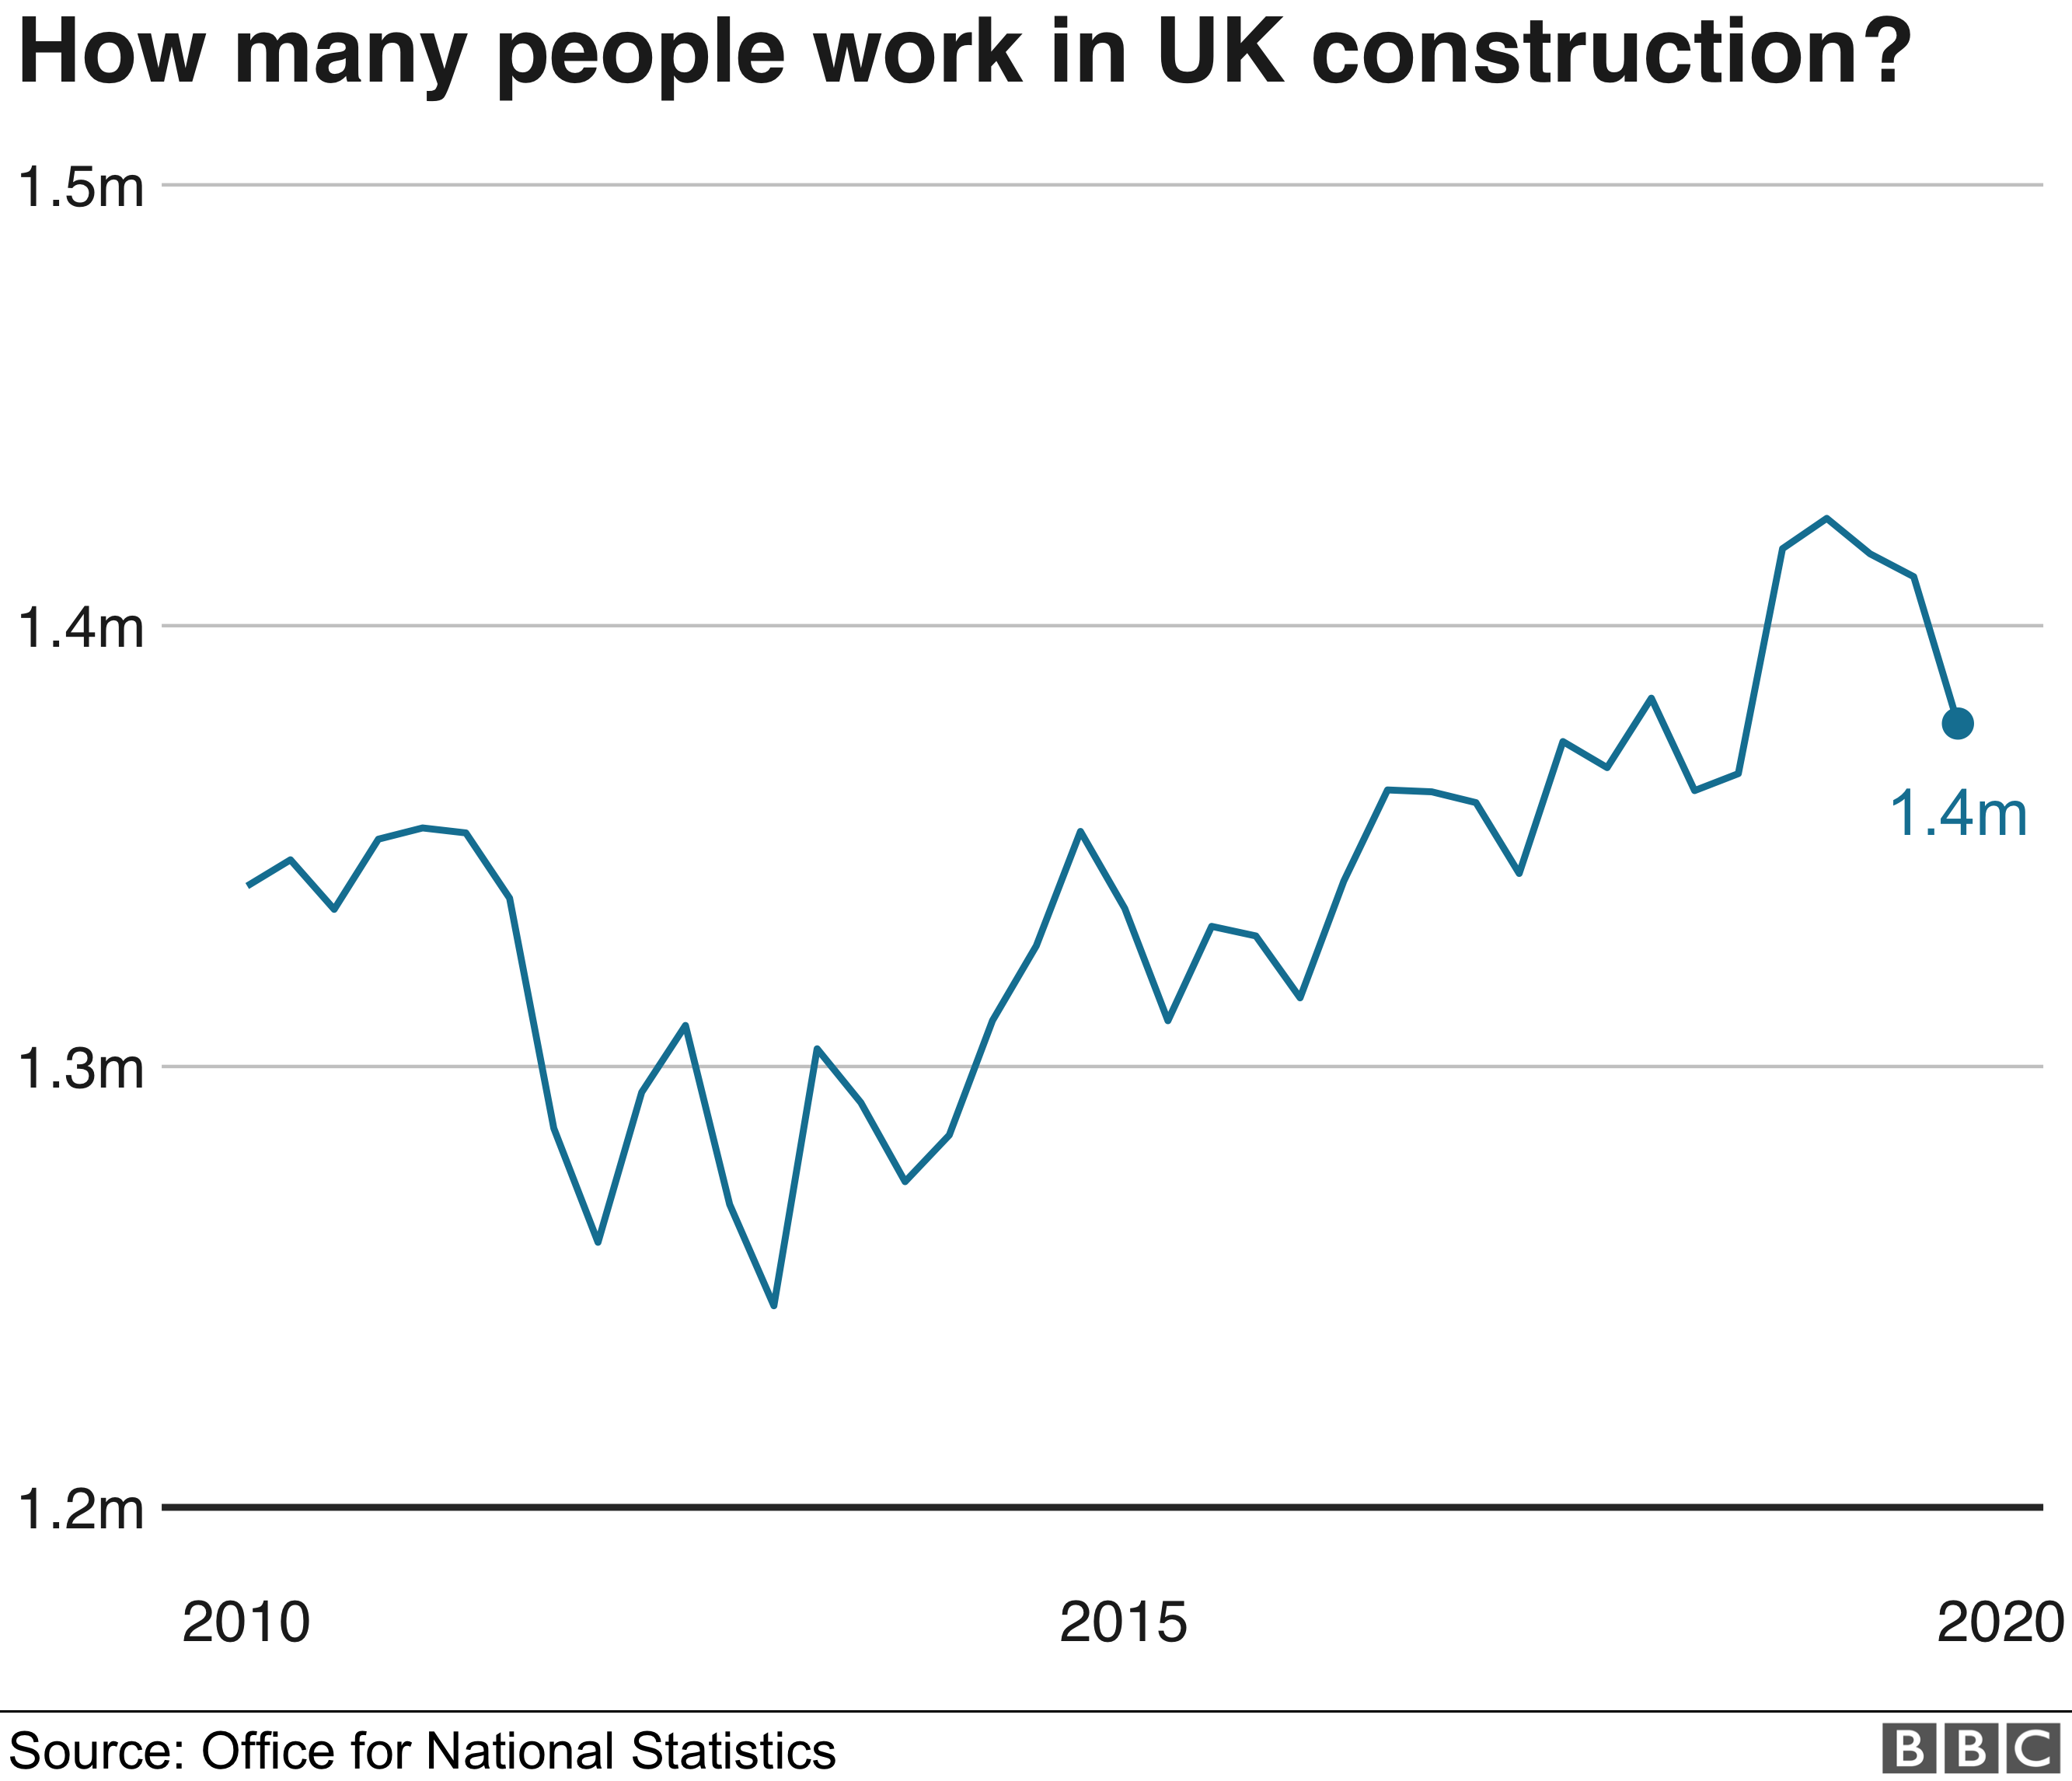 Chart showing there are currently 1.4 million construction workers in the UK